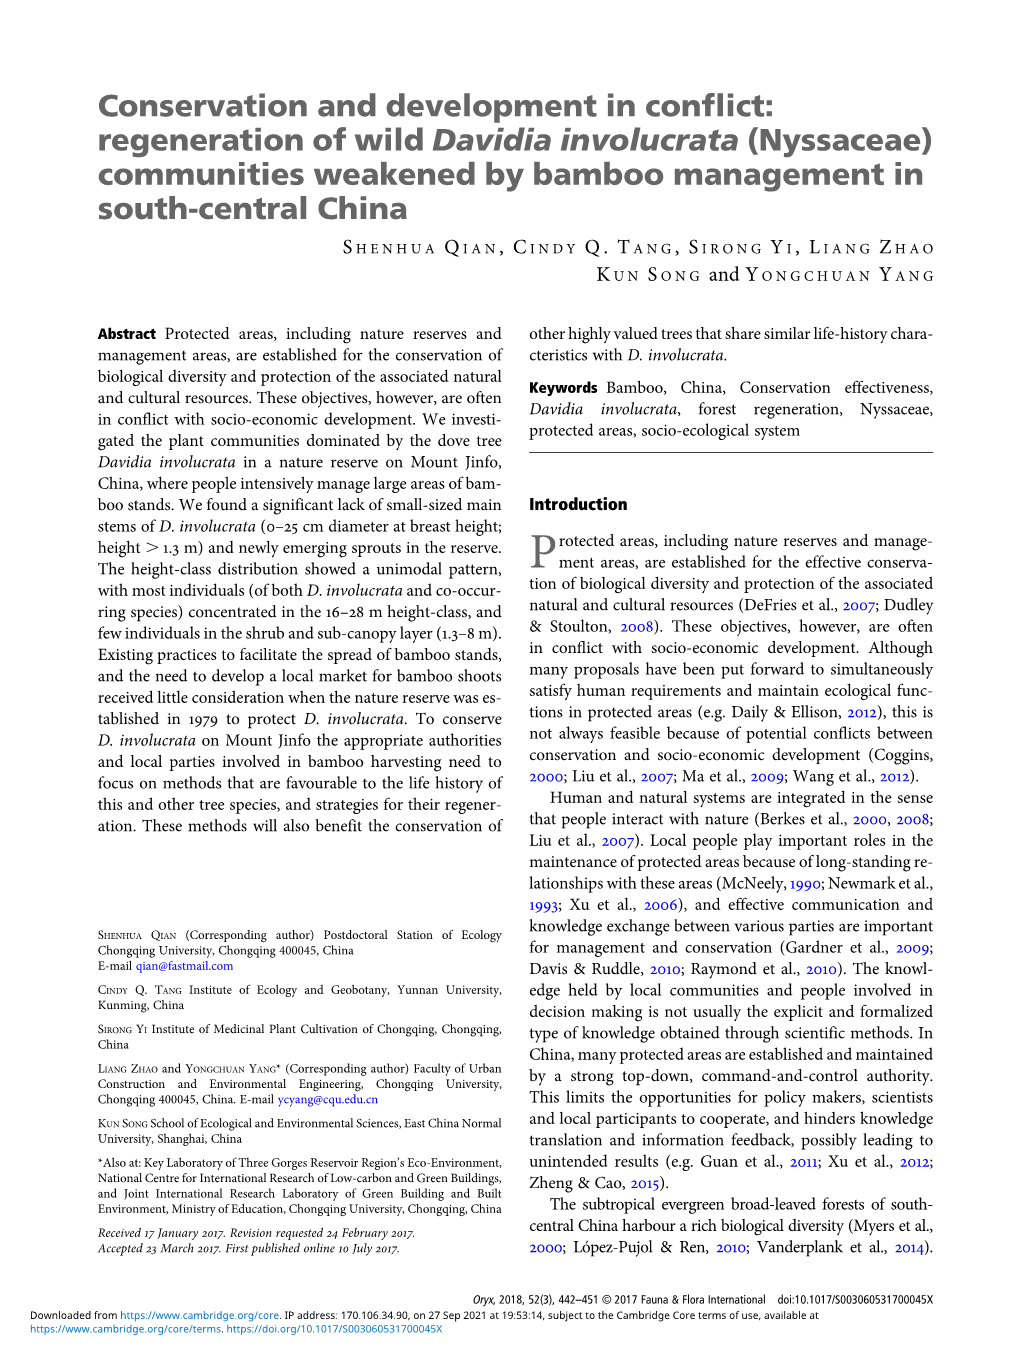 Conservation and Development in Conflict: Regeneration of Wild Davidia Involucrata (Nyssaceae) Communities Weakened by Bamboo Management in South-Central China